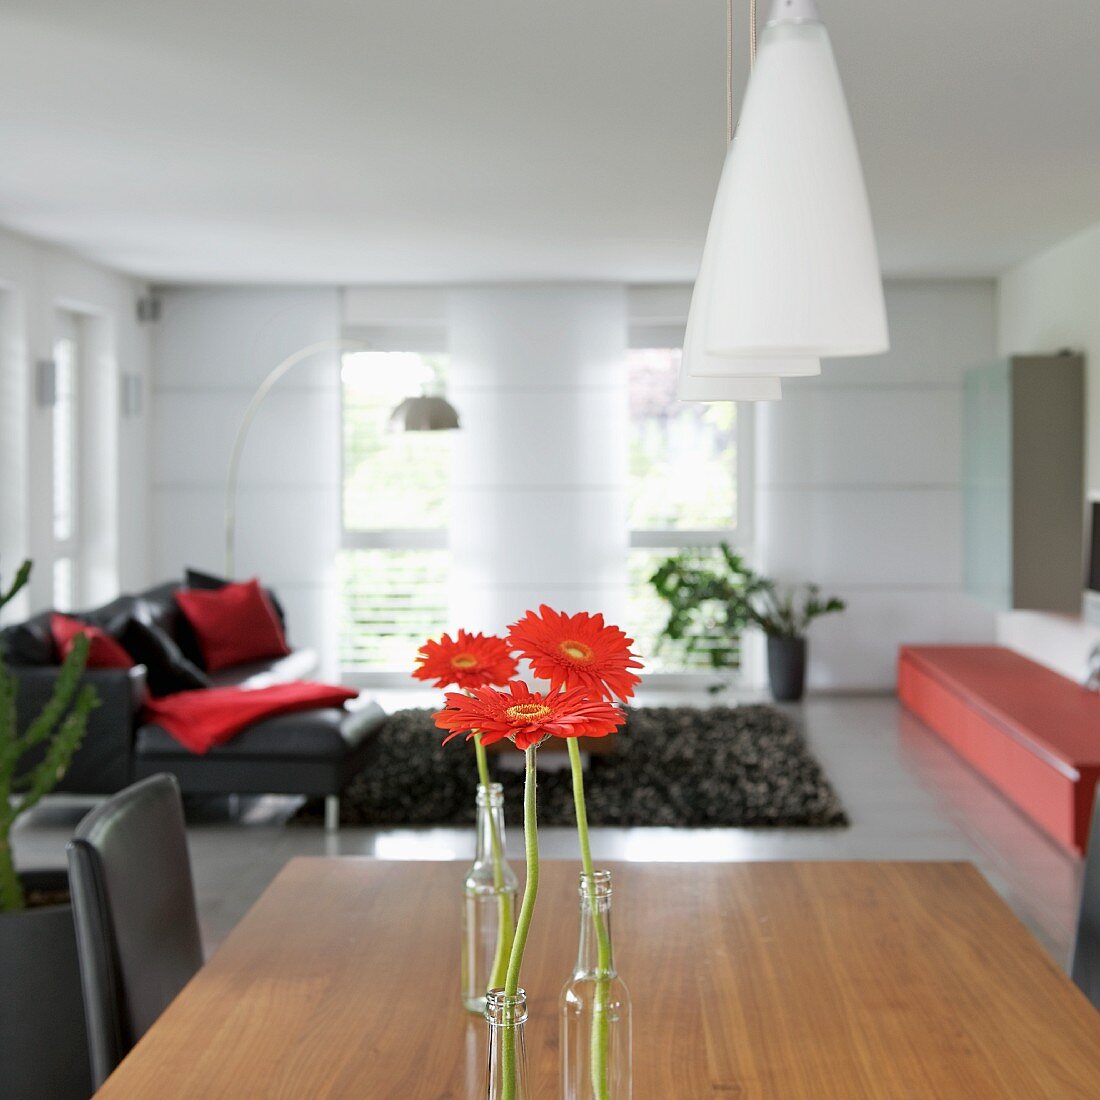 Single red gerbera daisies in bottles on dining table below pendant lamps with frosted glass shades and designer lounge area in background